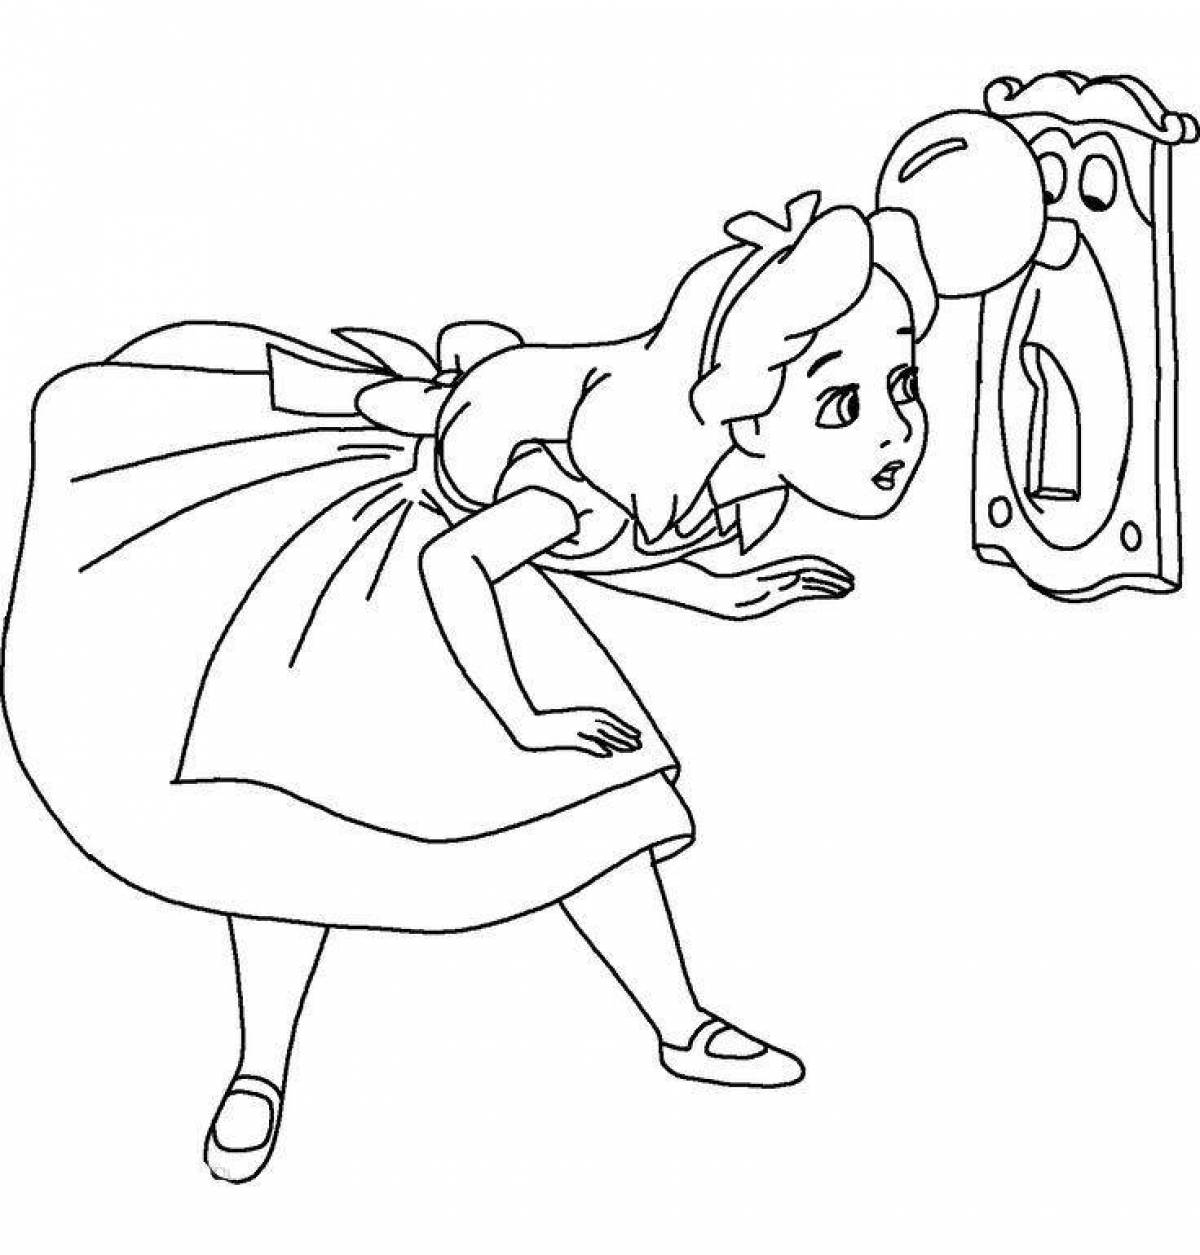 Adorable Alice finds a coloring book